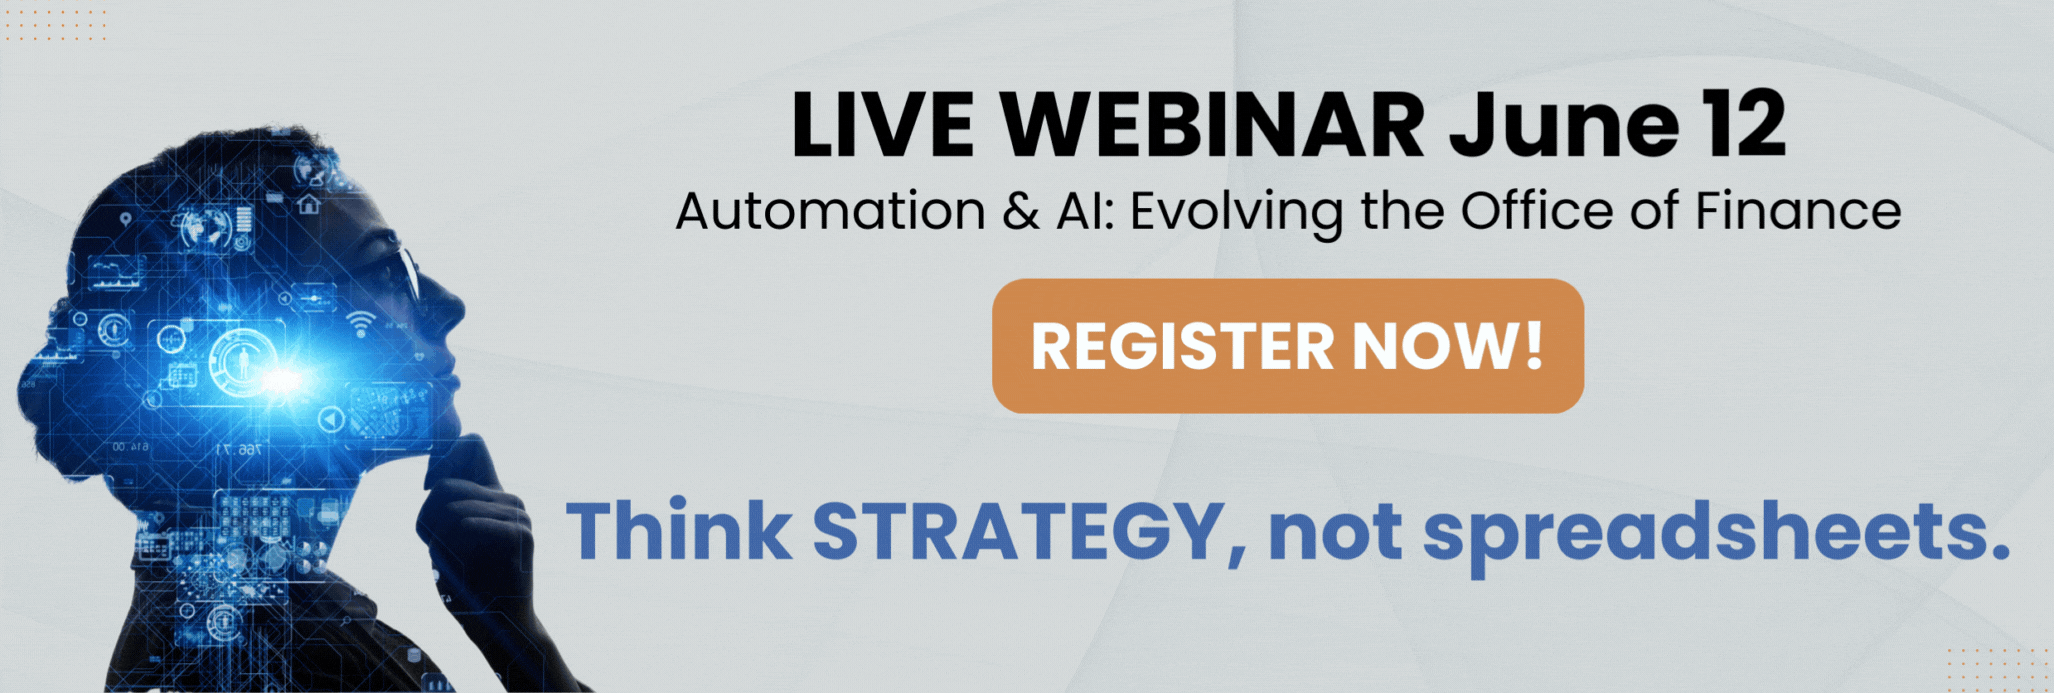 LIVE WEBINAR June 12 Automation & AI Evolving the Office of Finance